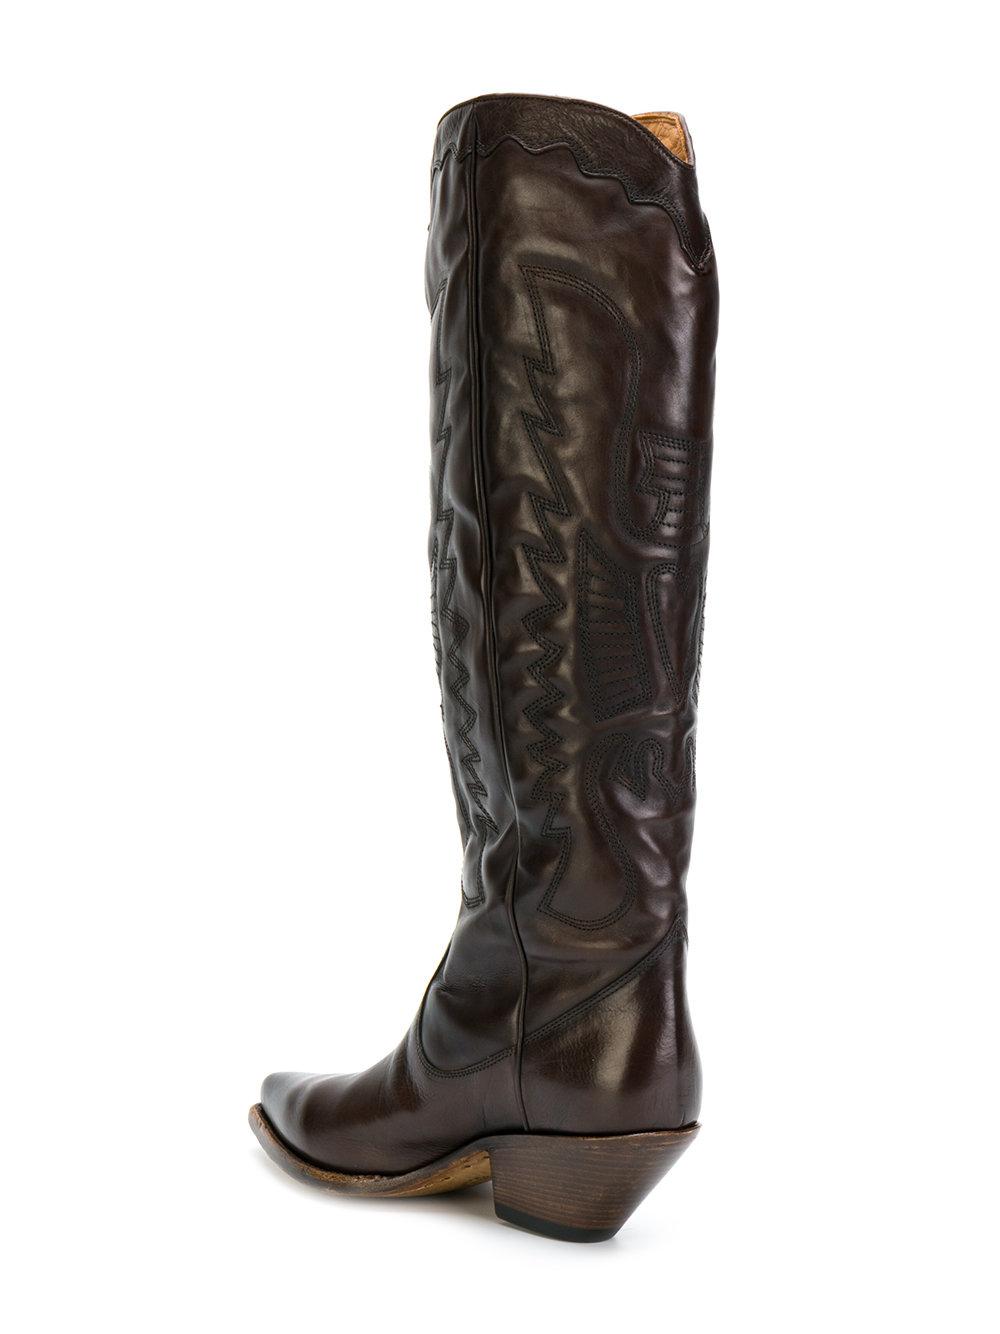 Buttero Leather Cowboy Boots in Brown - Lyst